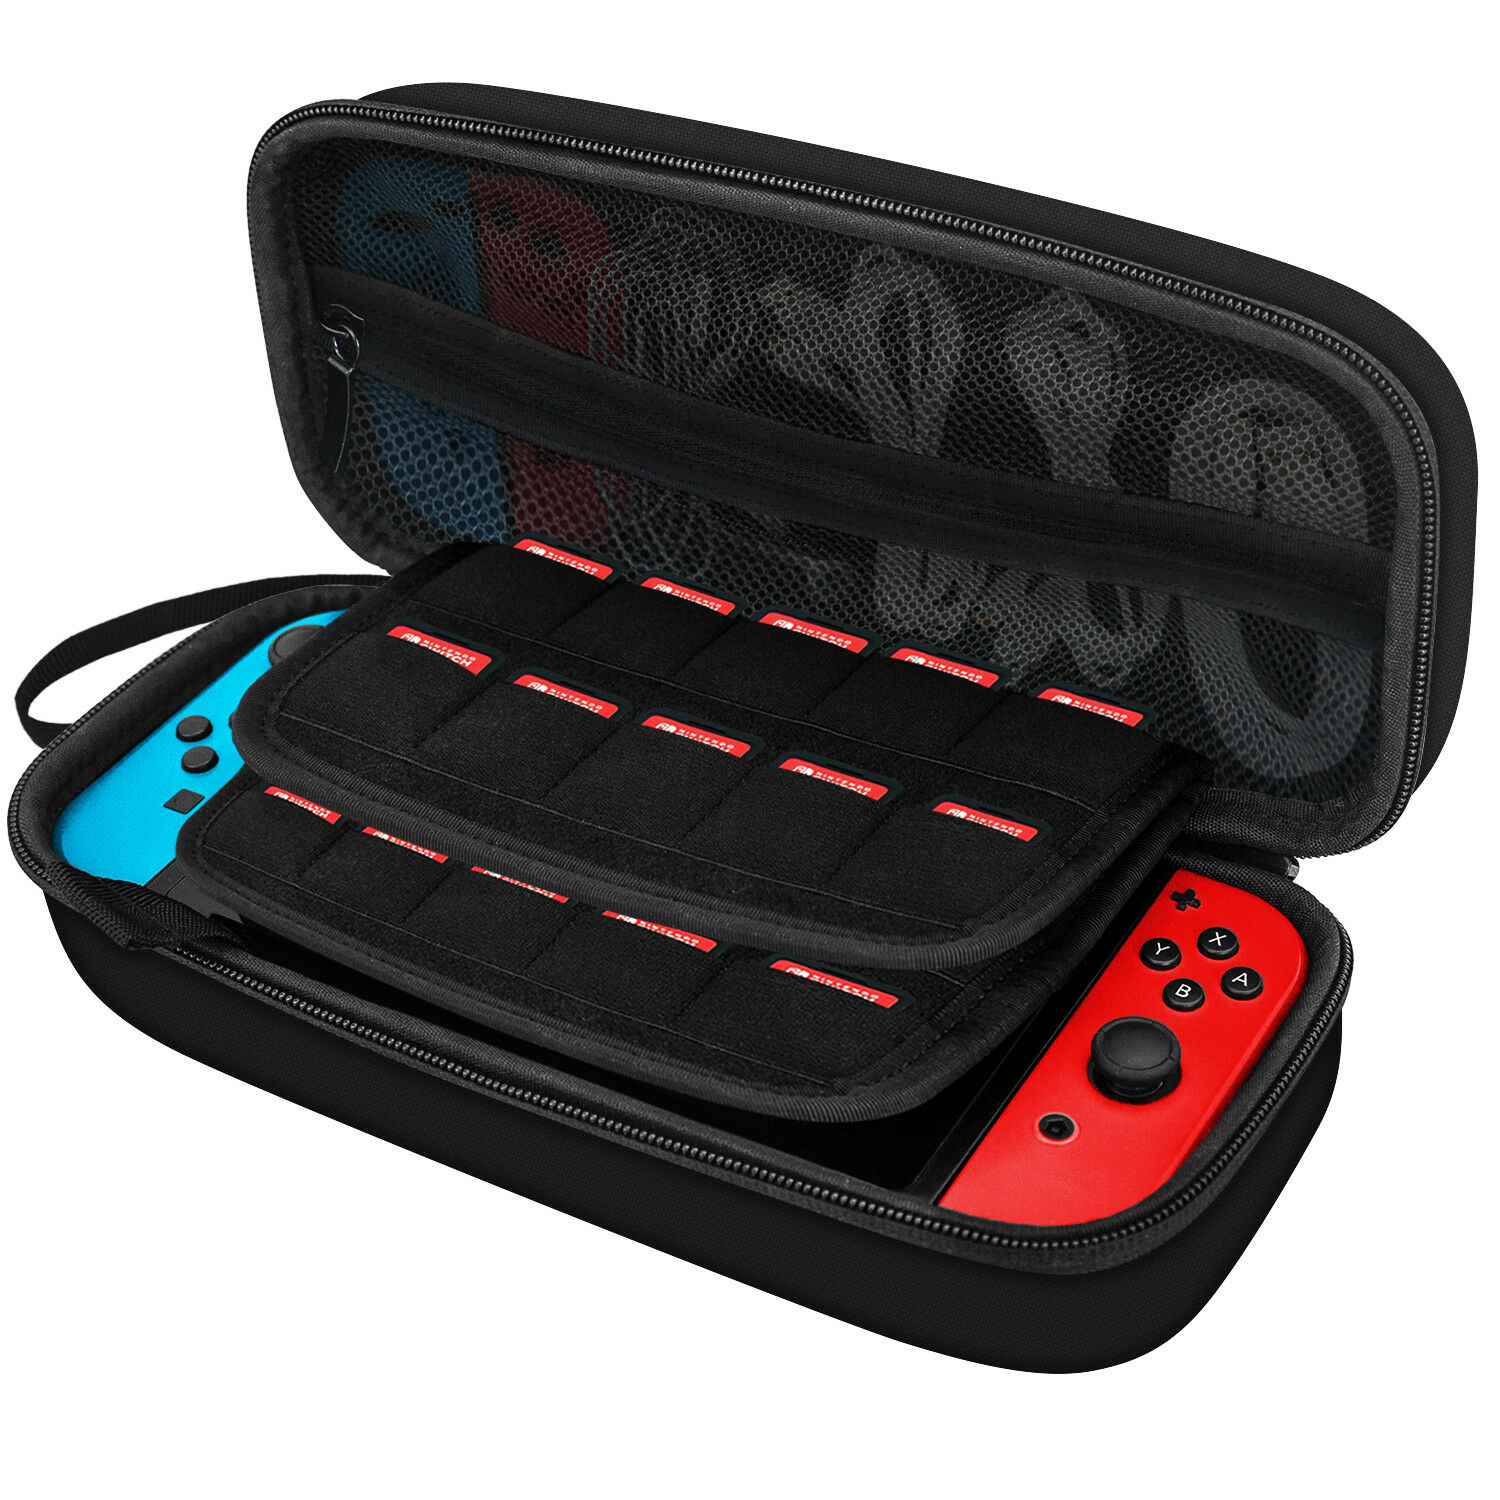 Jetech Carrying Case For Nintendo Switch With 20 Game Cartridge Holders Black